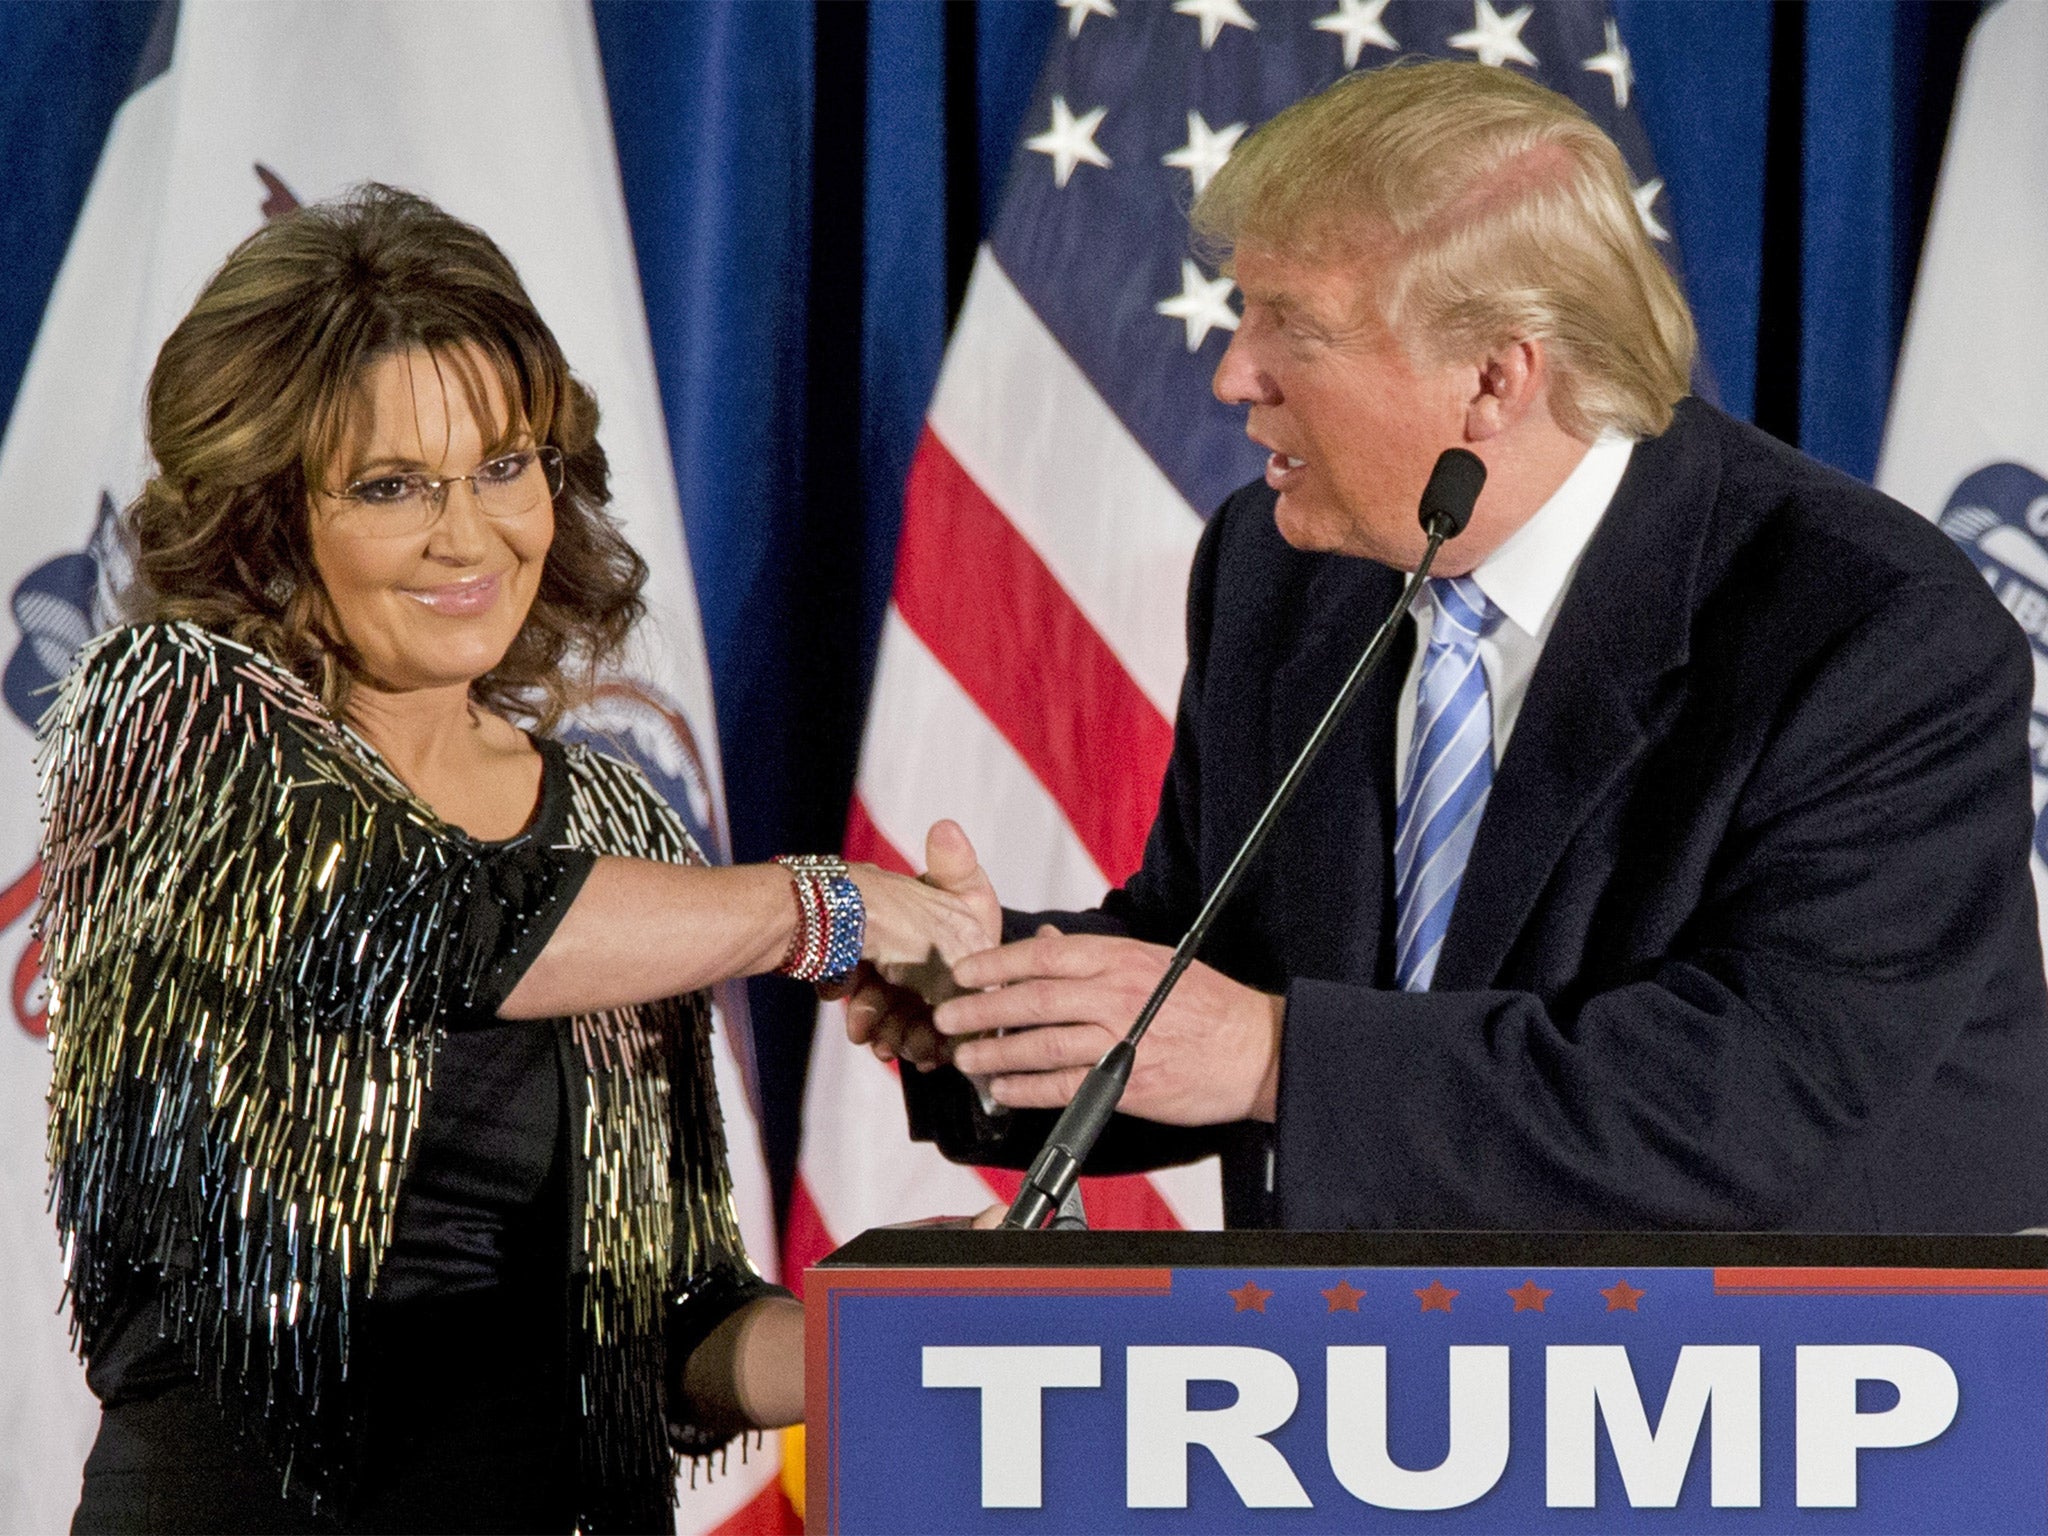 Donald Trump with Sarah Palin, who backed him in his bid to be the republican presidential candidate, at Iowa State University on Tuesday